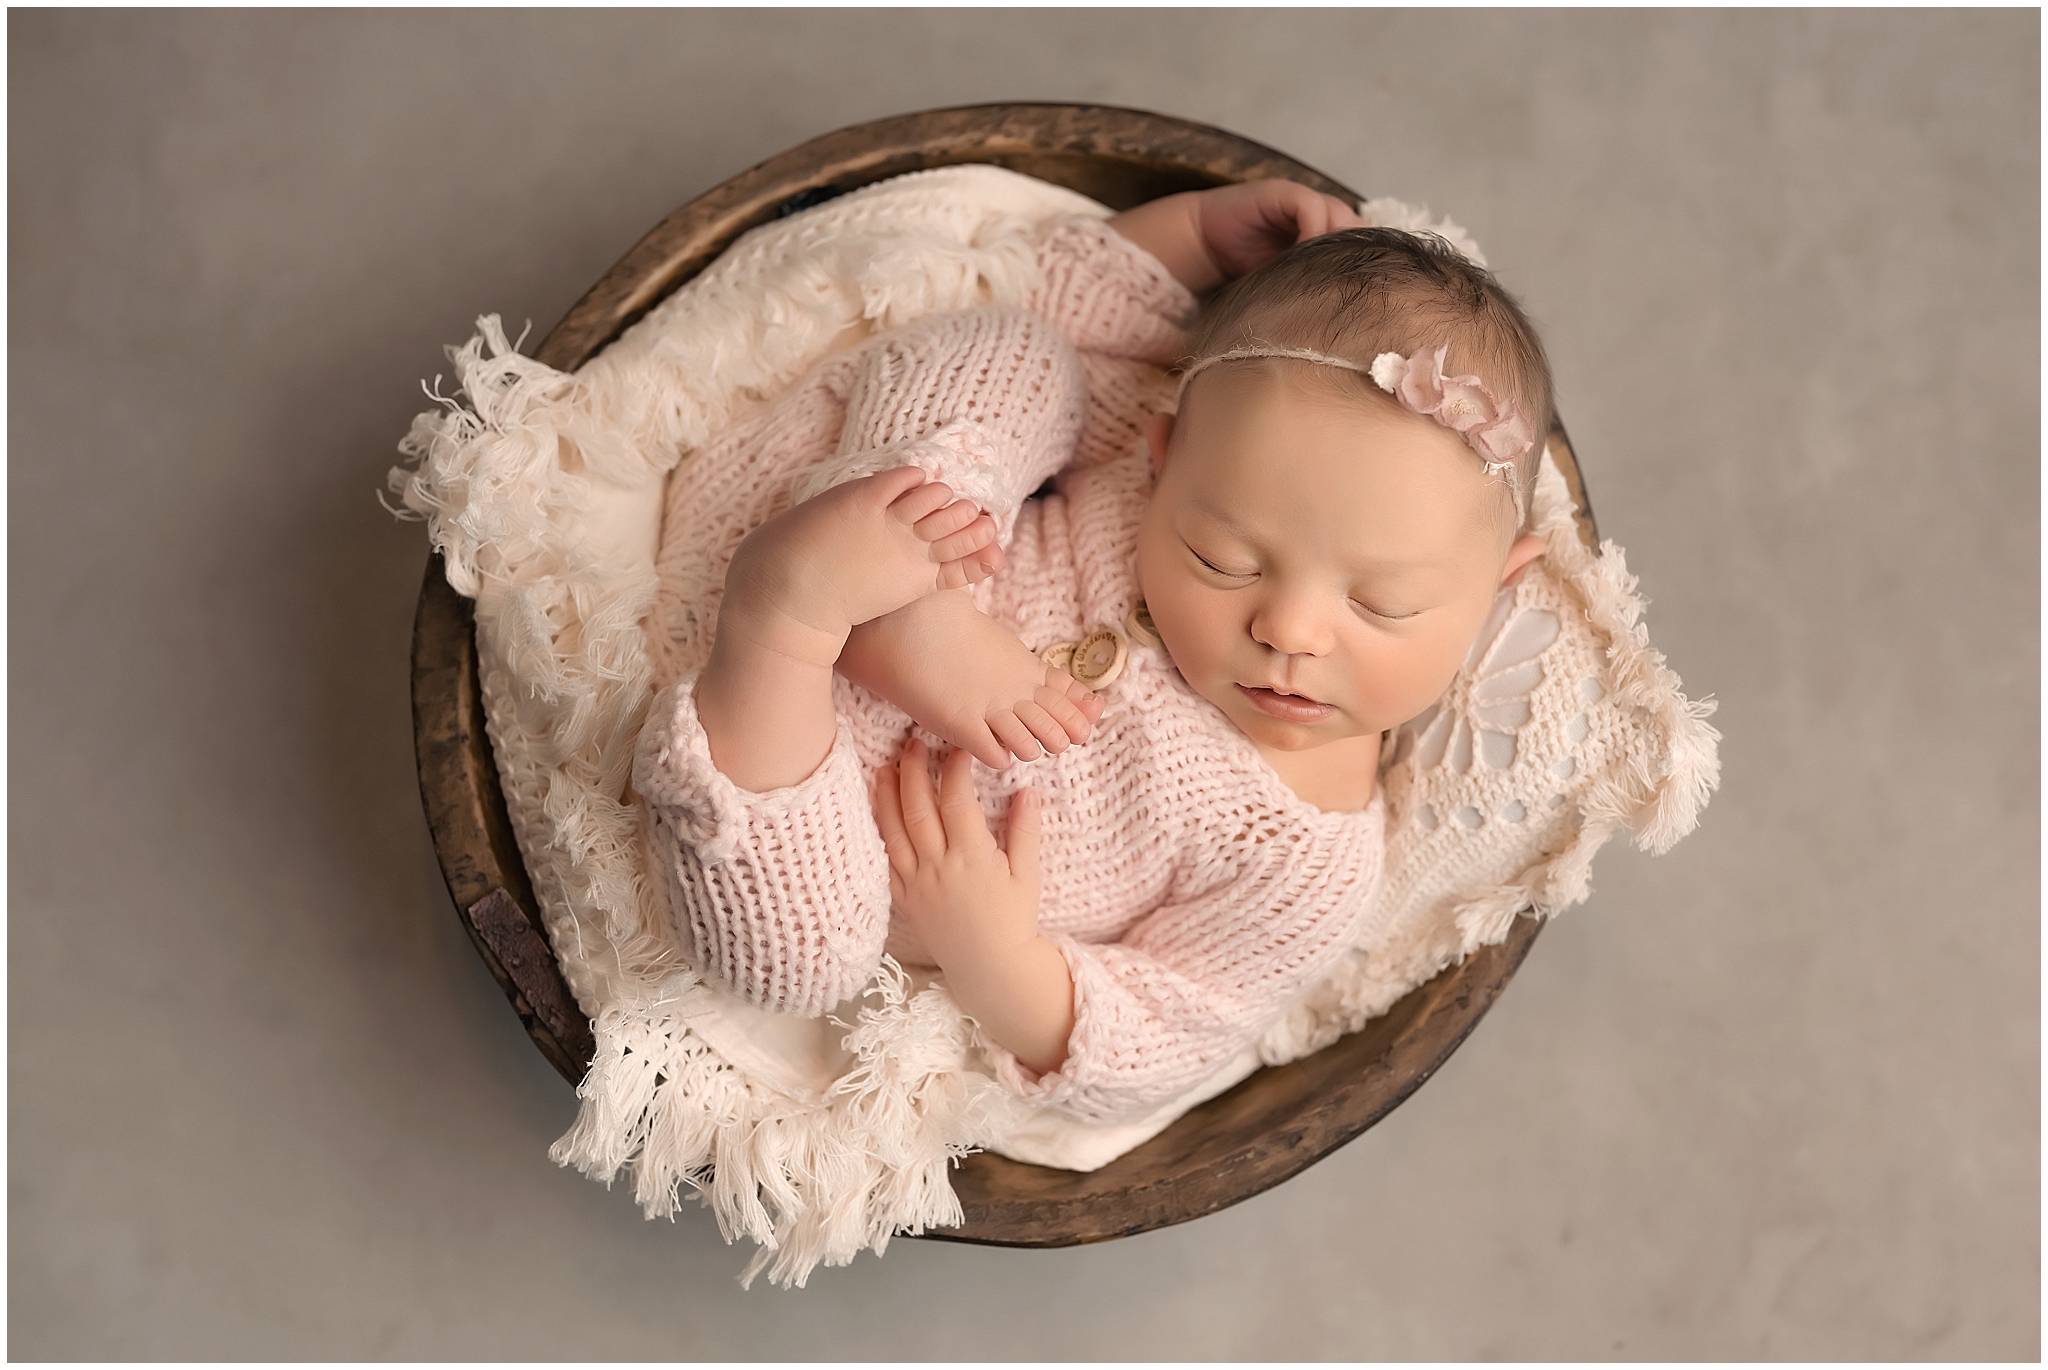 baby sleeping in bowl during newborn photography session in london ontario